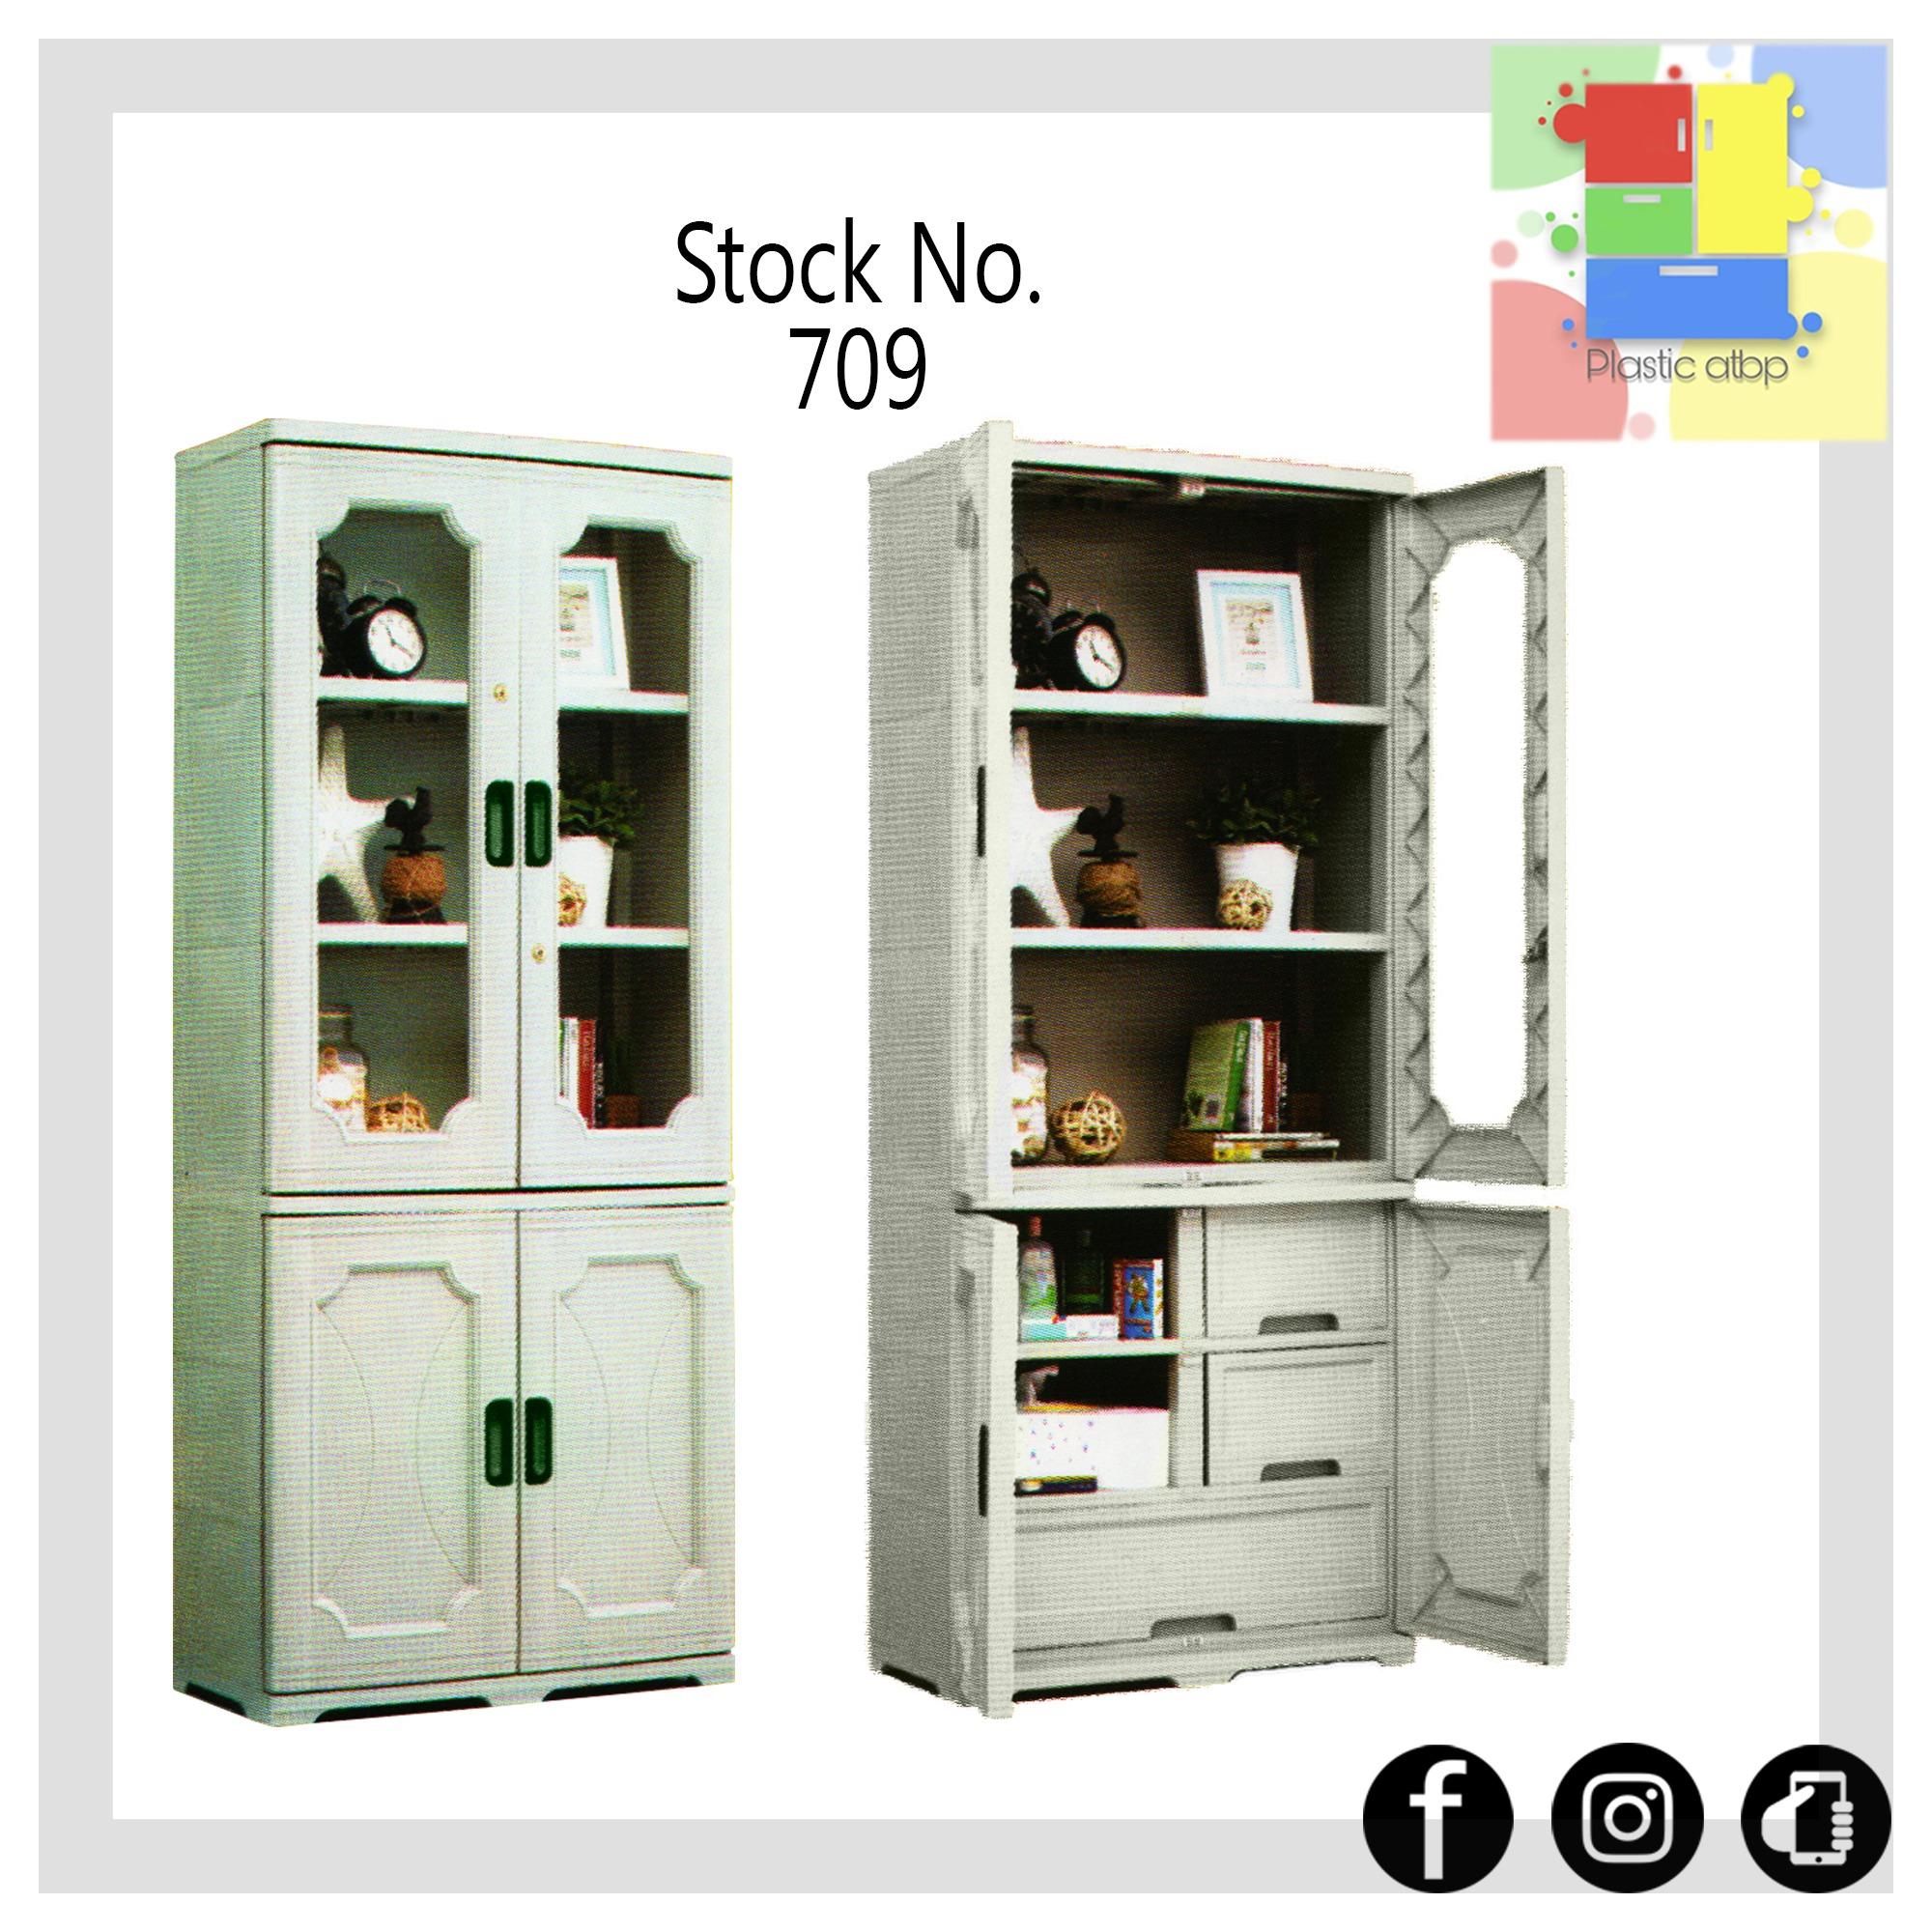  Zooey Plastic Cabinet Philippines Mail Cabinet 